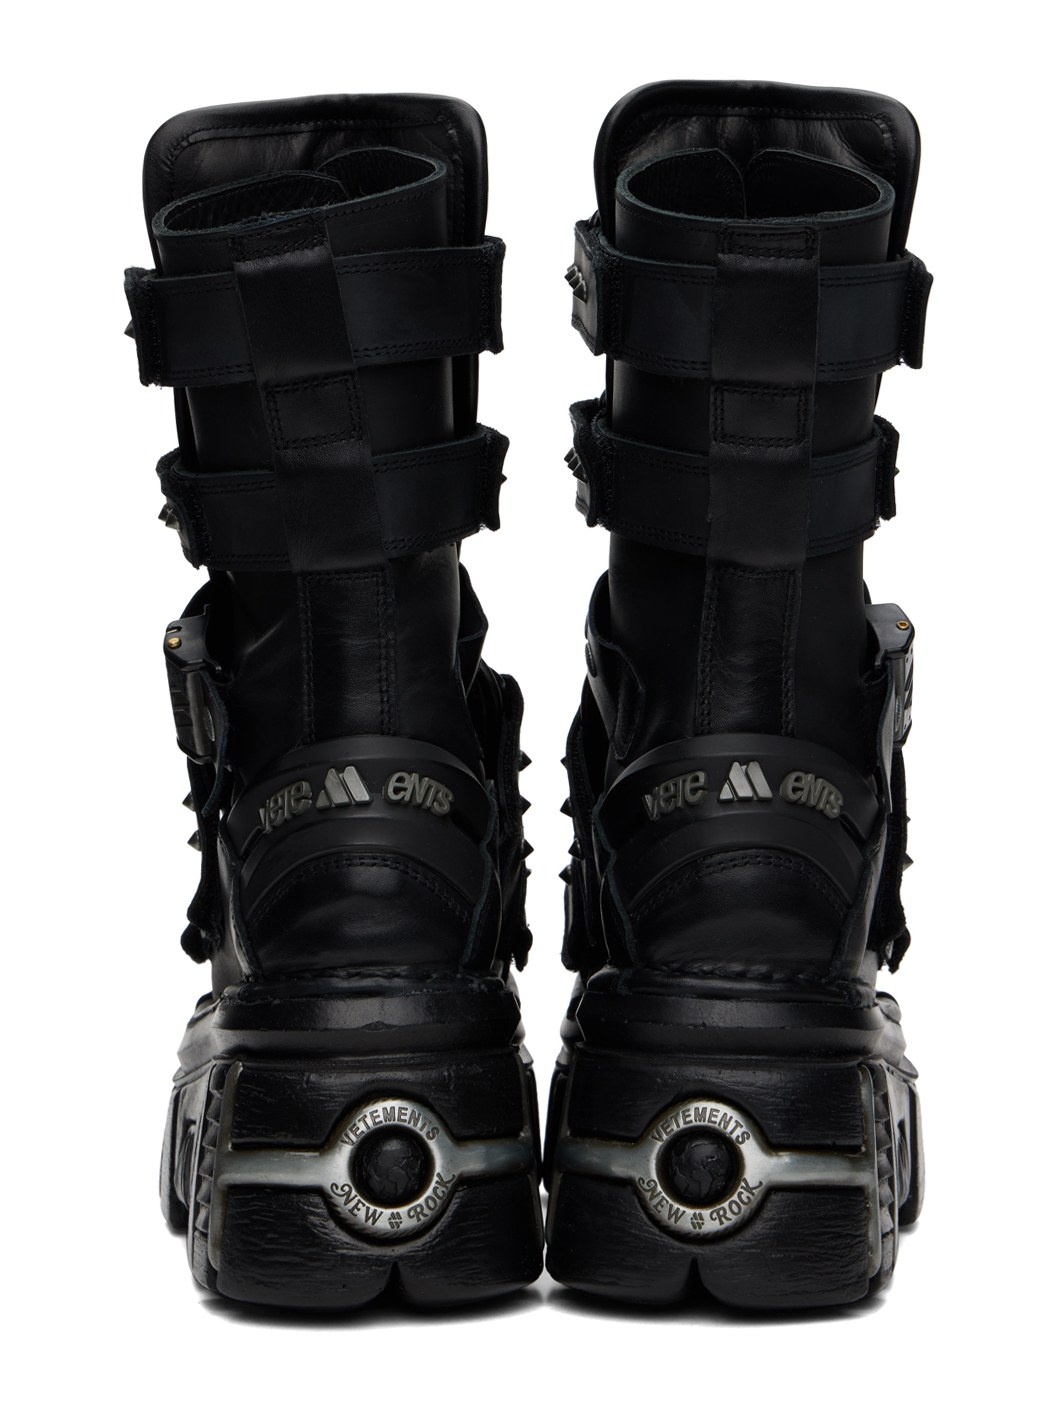 Black New Rock Edition Gamer Boots - 2